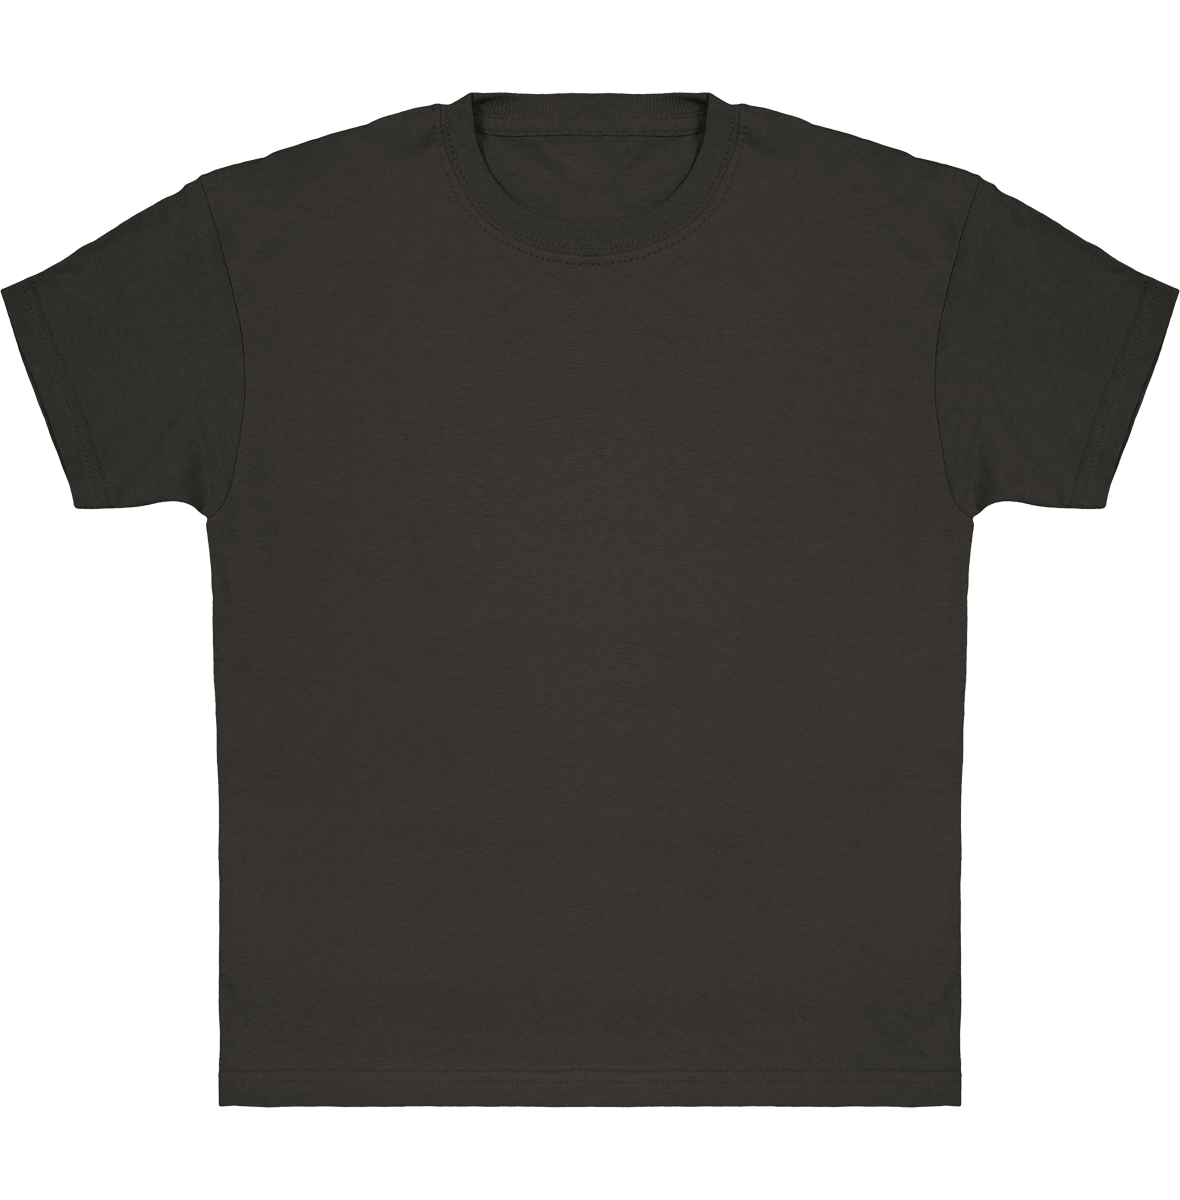 Classic Cotton T-Shirt For Children To Customize Light Graphite